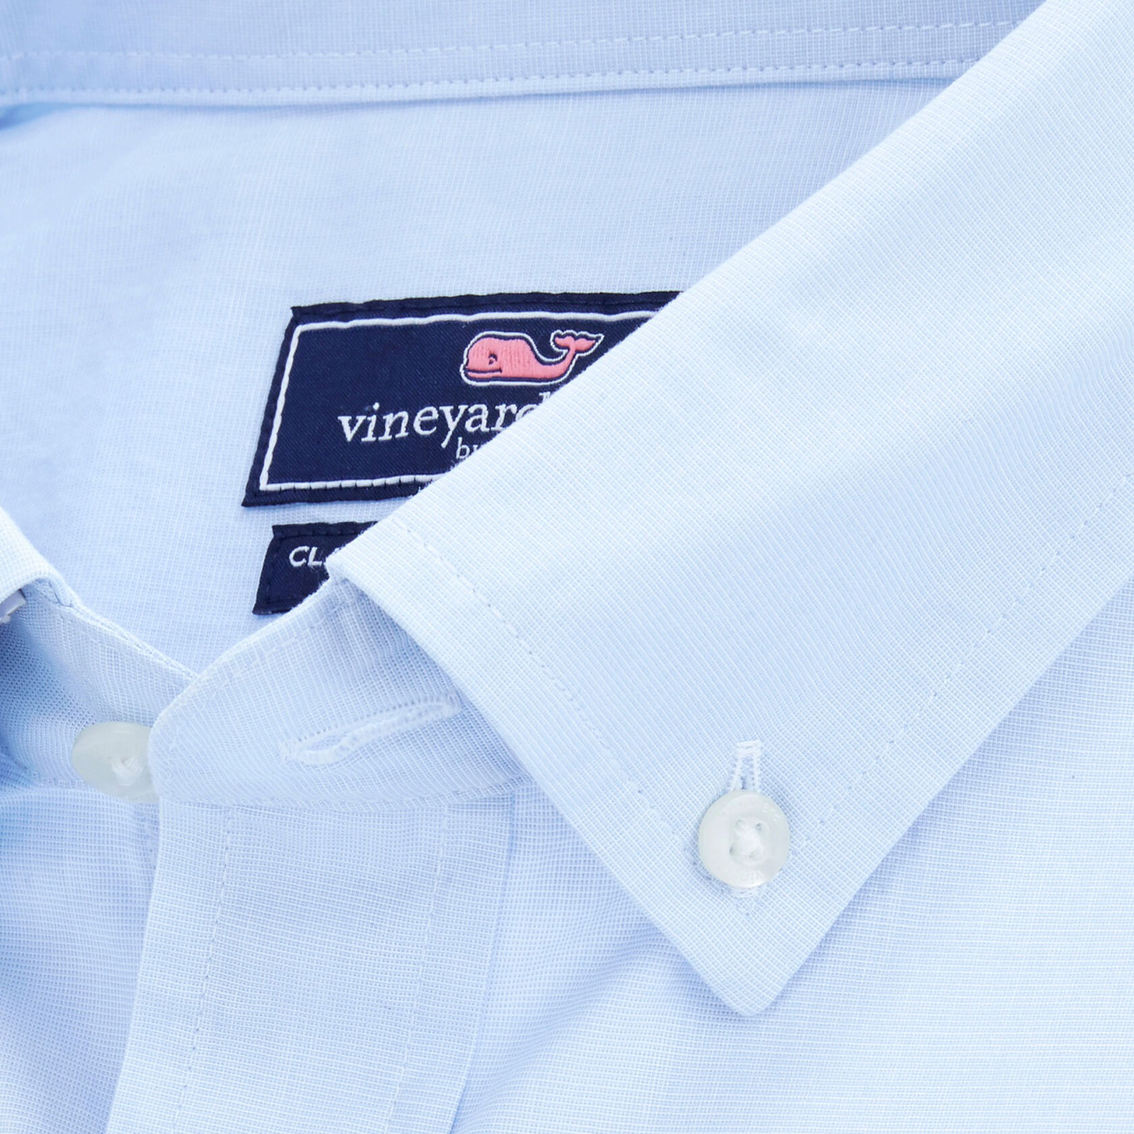 Vineyard Vines Classic Fit End On End Stretch Murray Shirt - Image 2 of 2